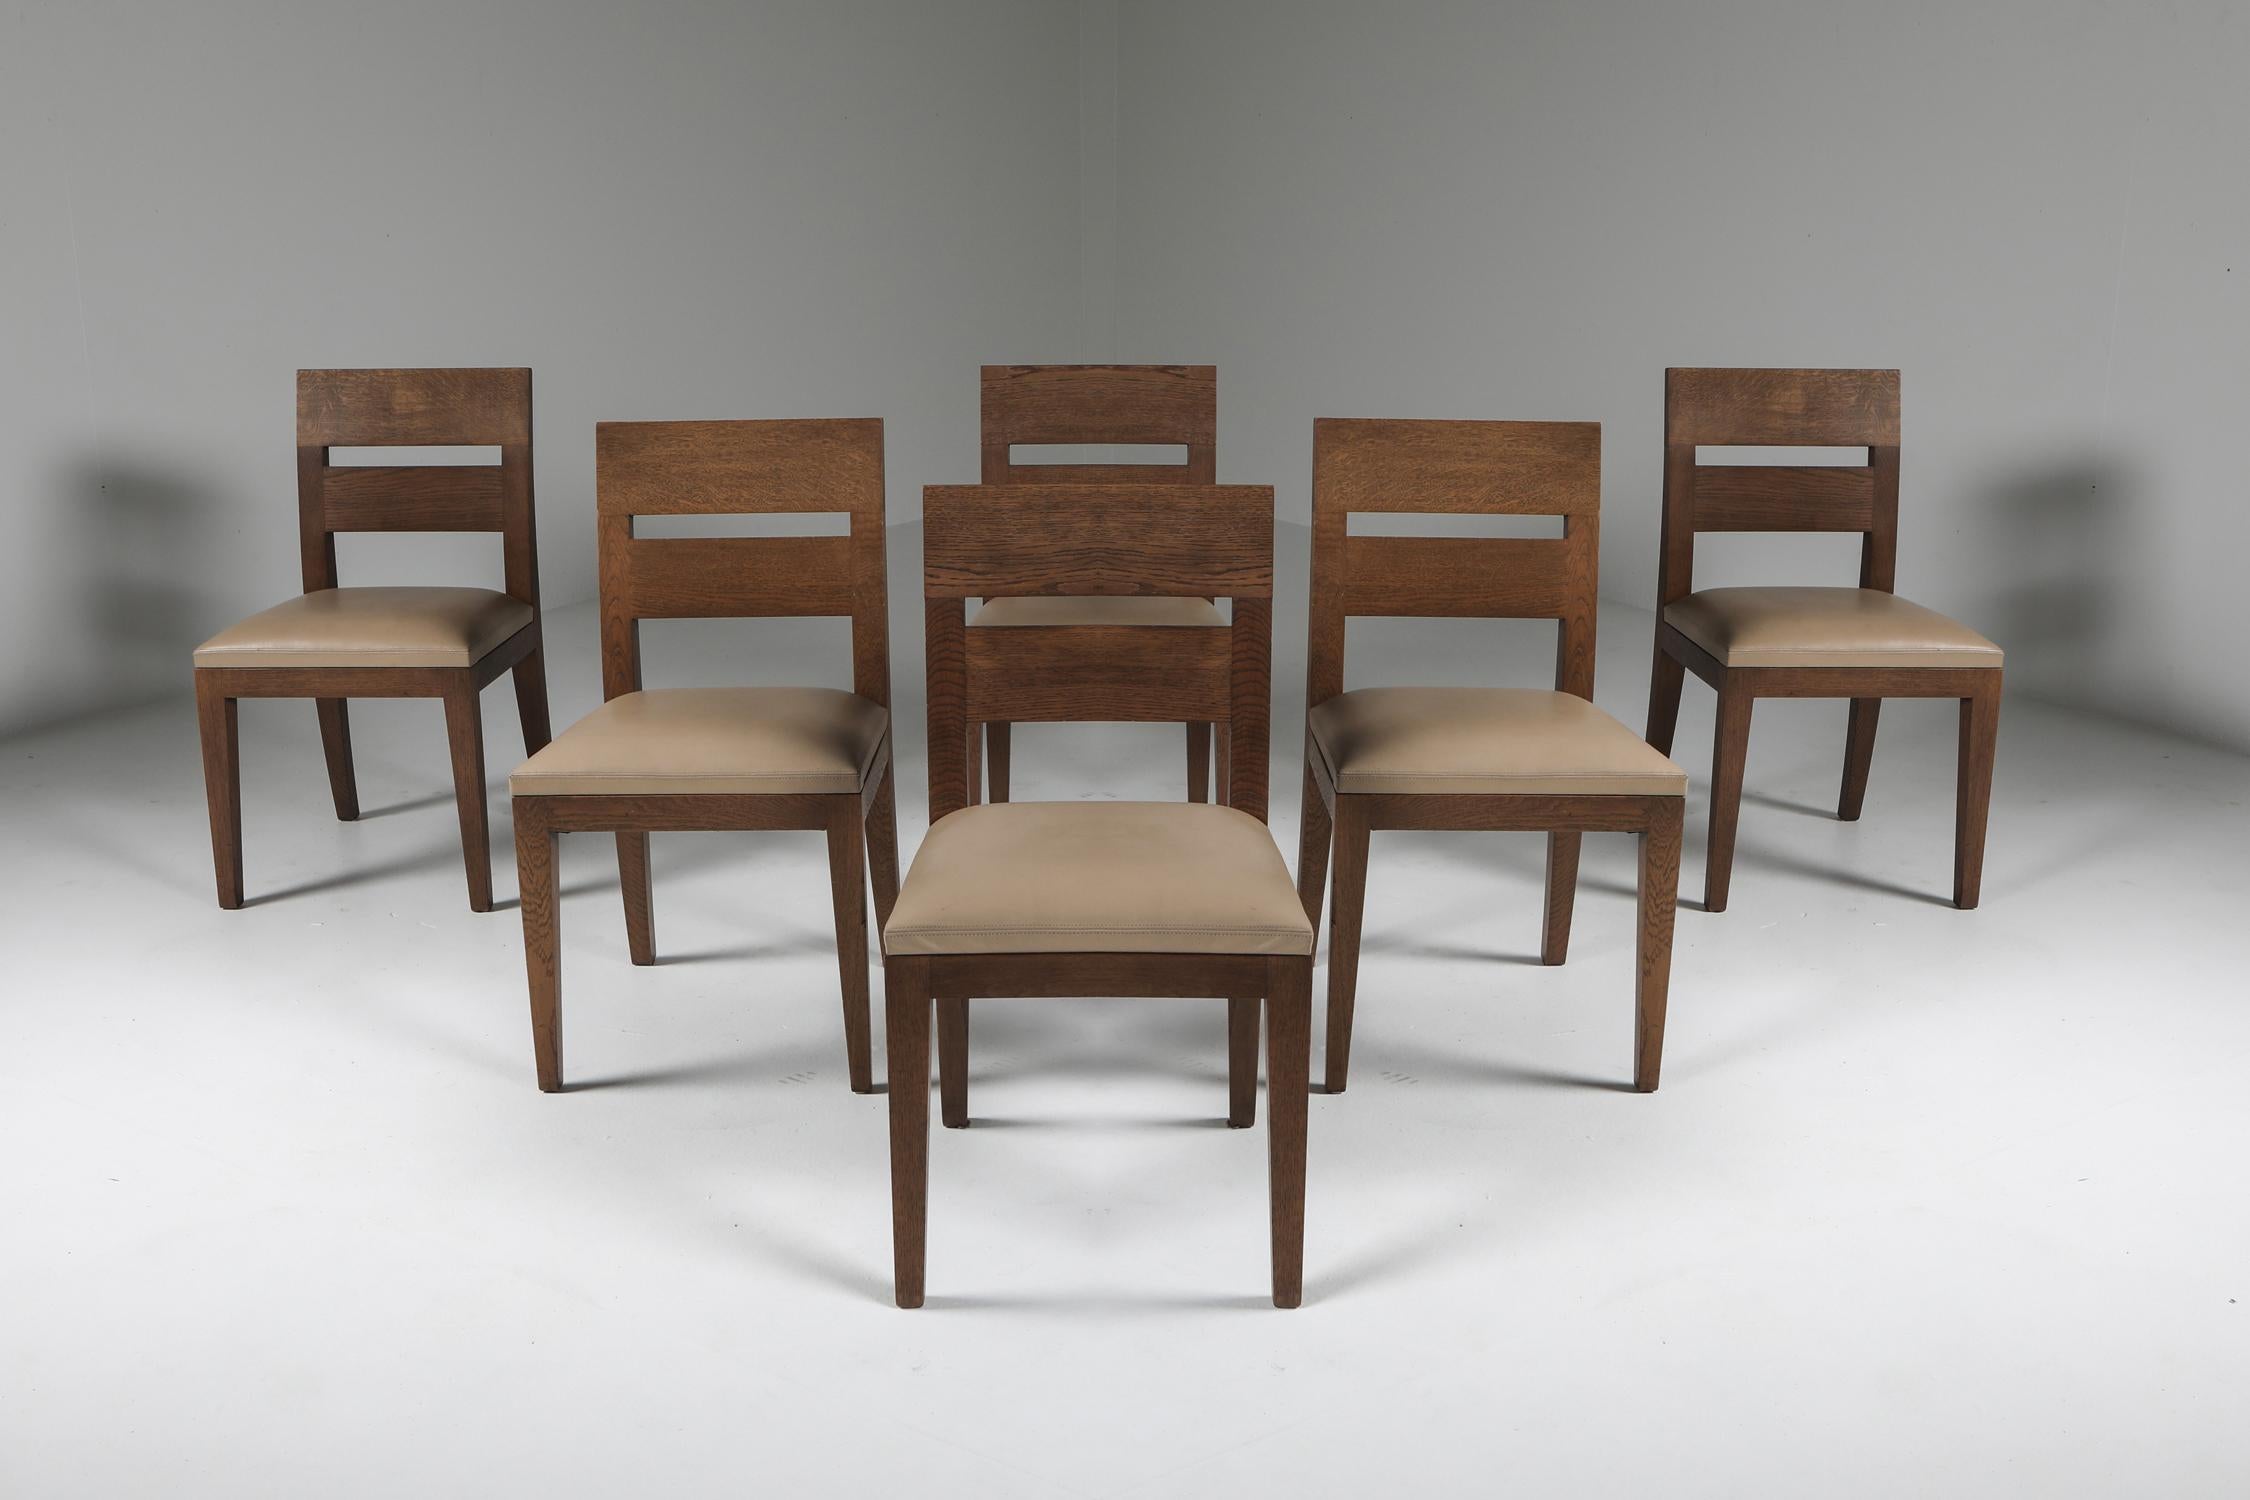 Christian Liaigre, dining chairs, solid oak, beige leather, France, 1999

Christian Liaigre was a French interior designer and architect.
Born into a family from Vendée, Liaigre entered the École nationale supérieure des Beaux-Arts and the École